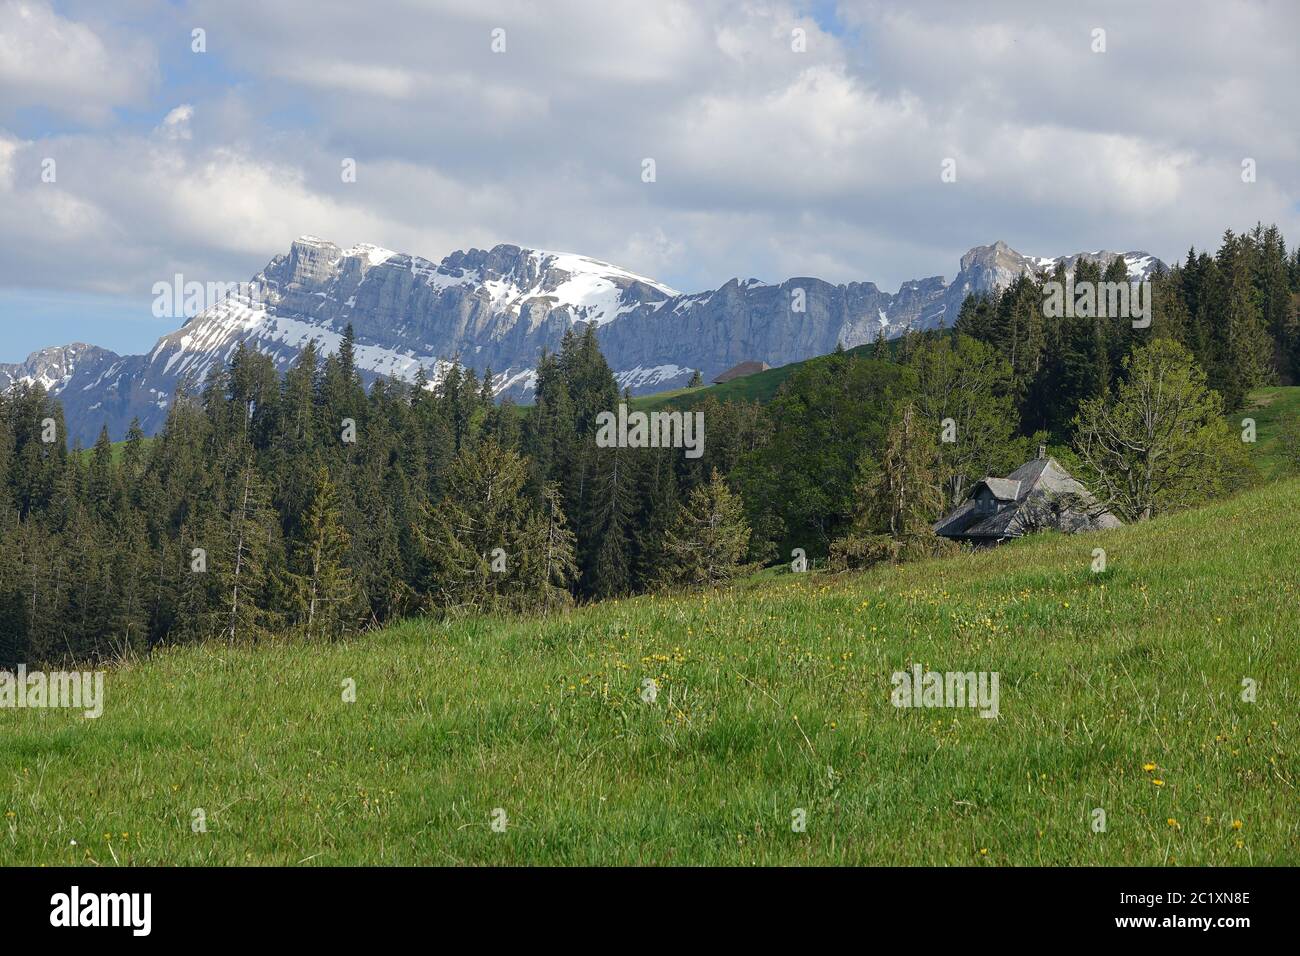 Landscape in Emmental / Switzerland with mountains and alpine meadows. Stock Photo